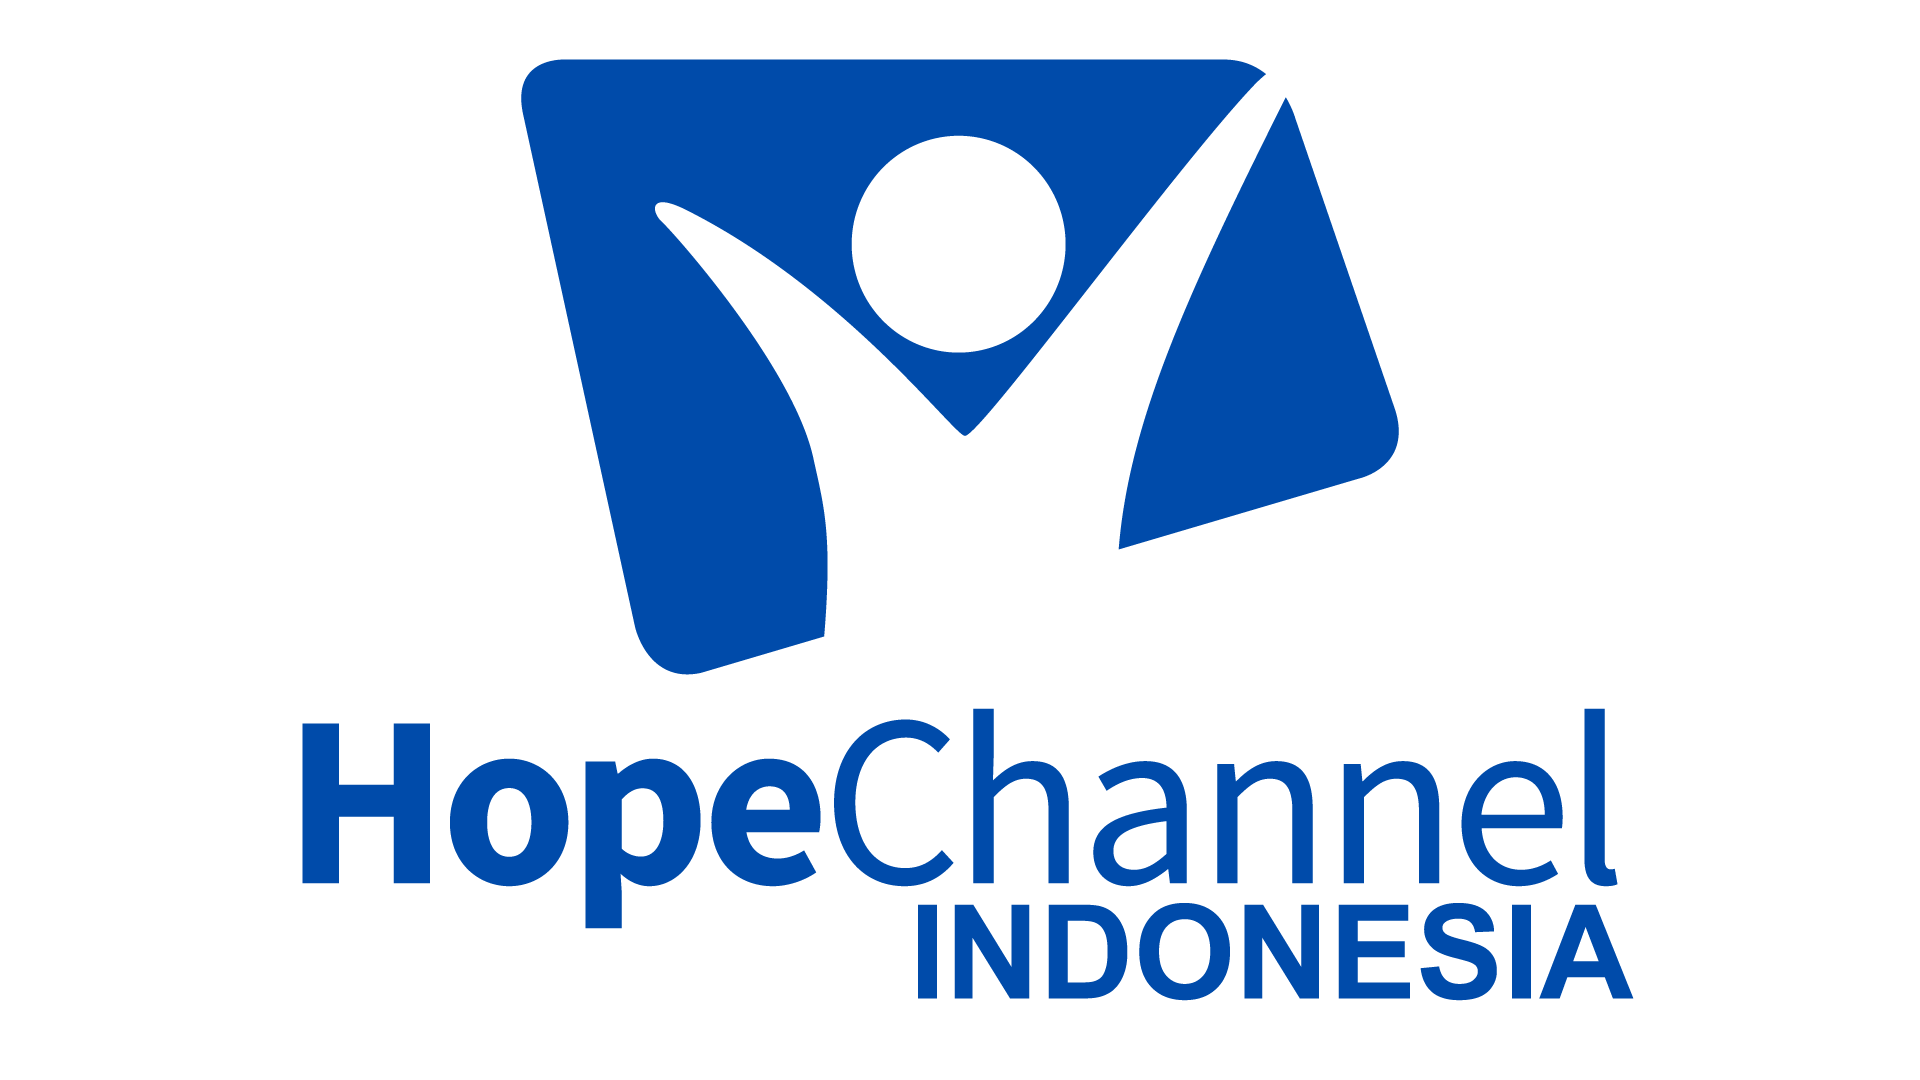 Hope Channel Indonesia Live TV, Online